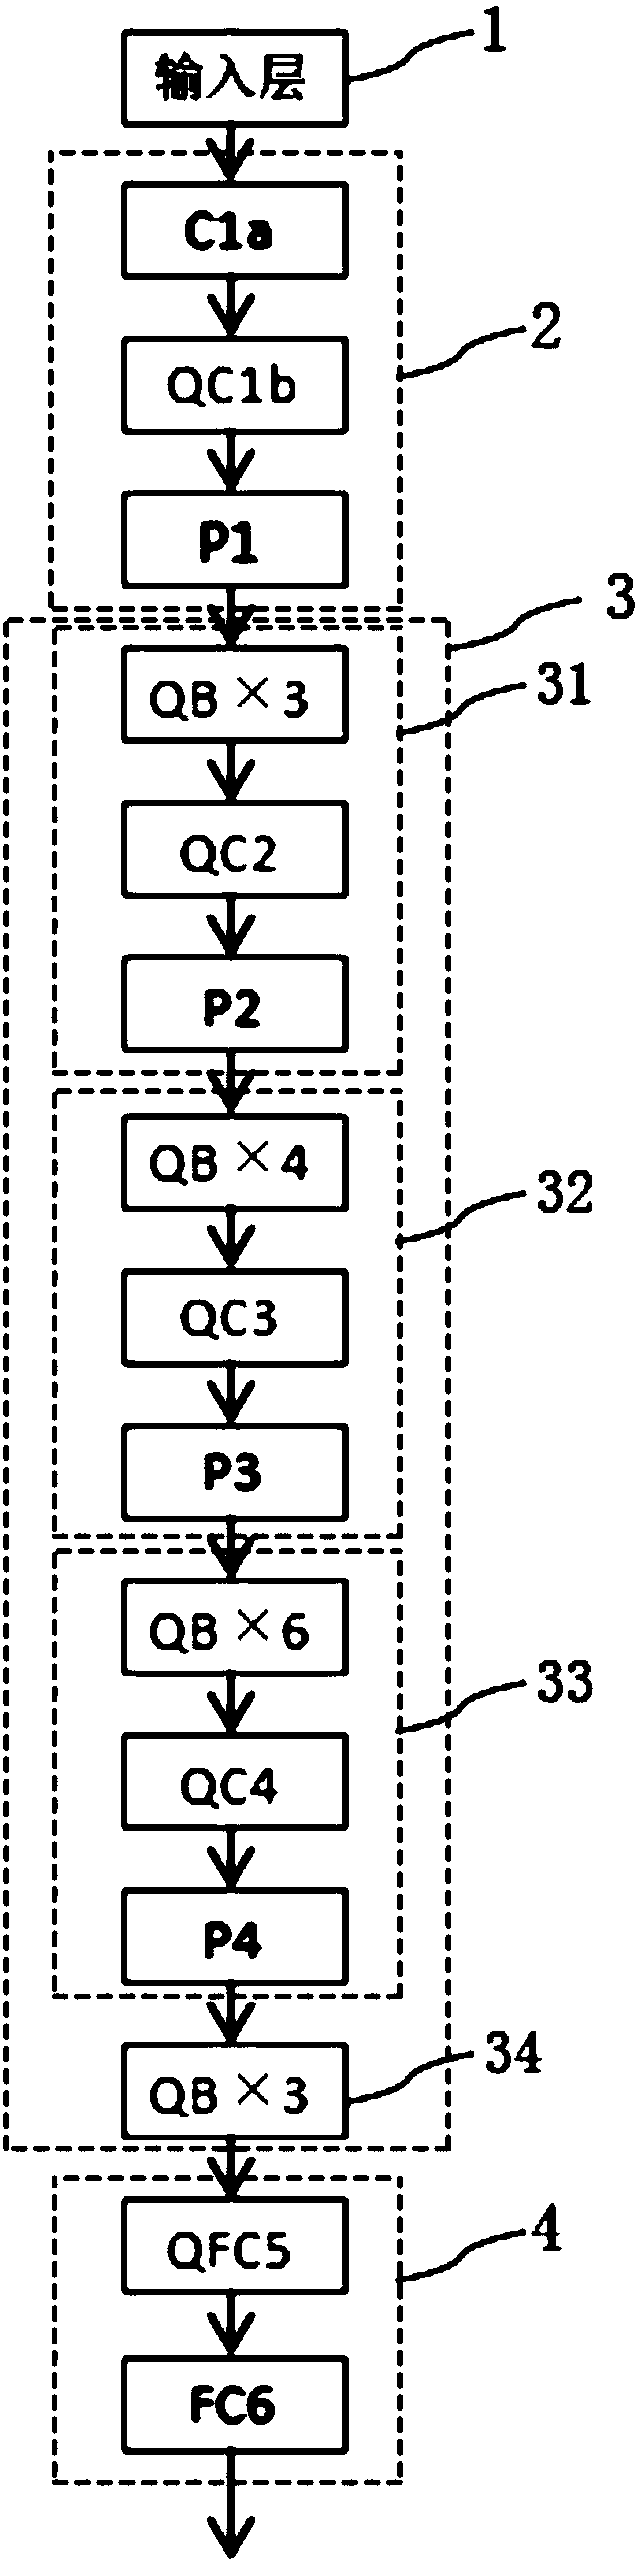 Human face recognition method and device based on residual-quantized convolutional neural network